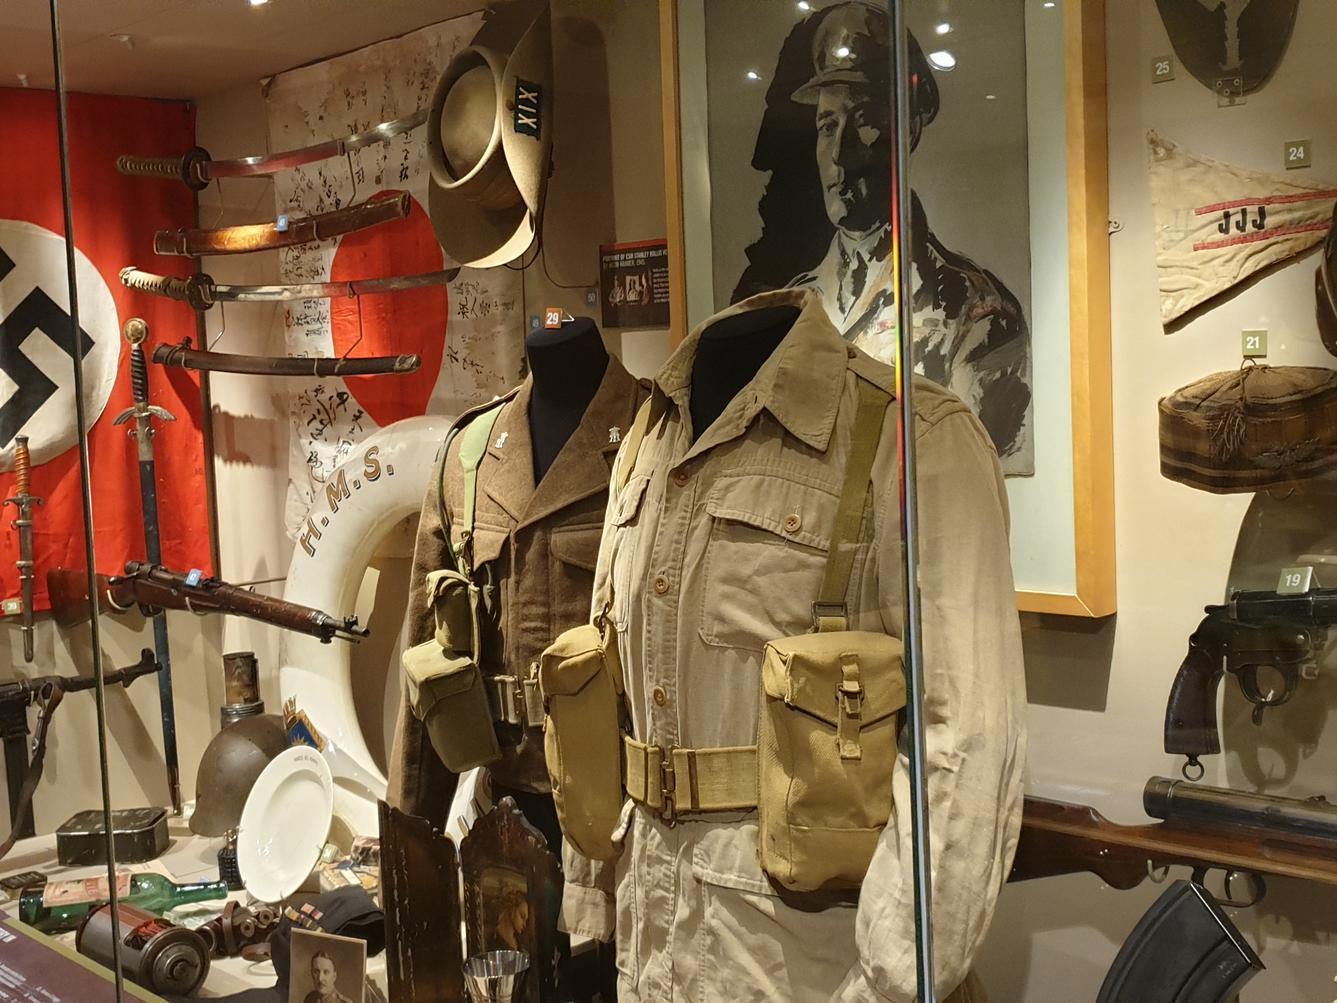 The museum charts conflicts throughout the regiment's history.